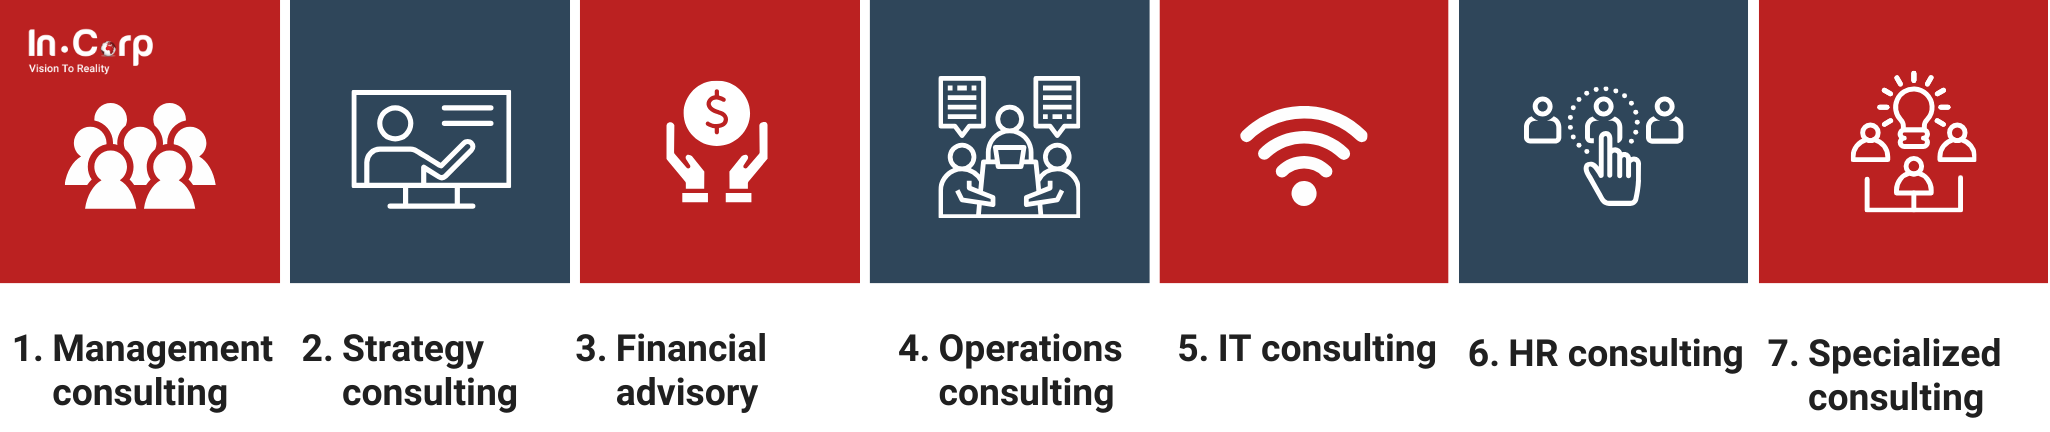 Top consulting firms criteria you should look for